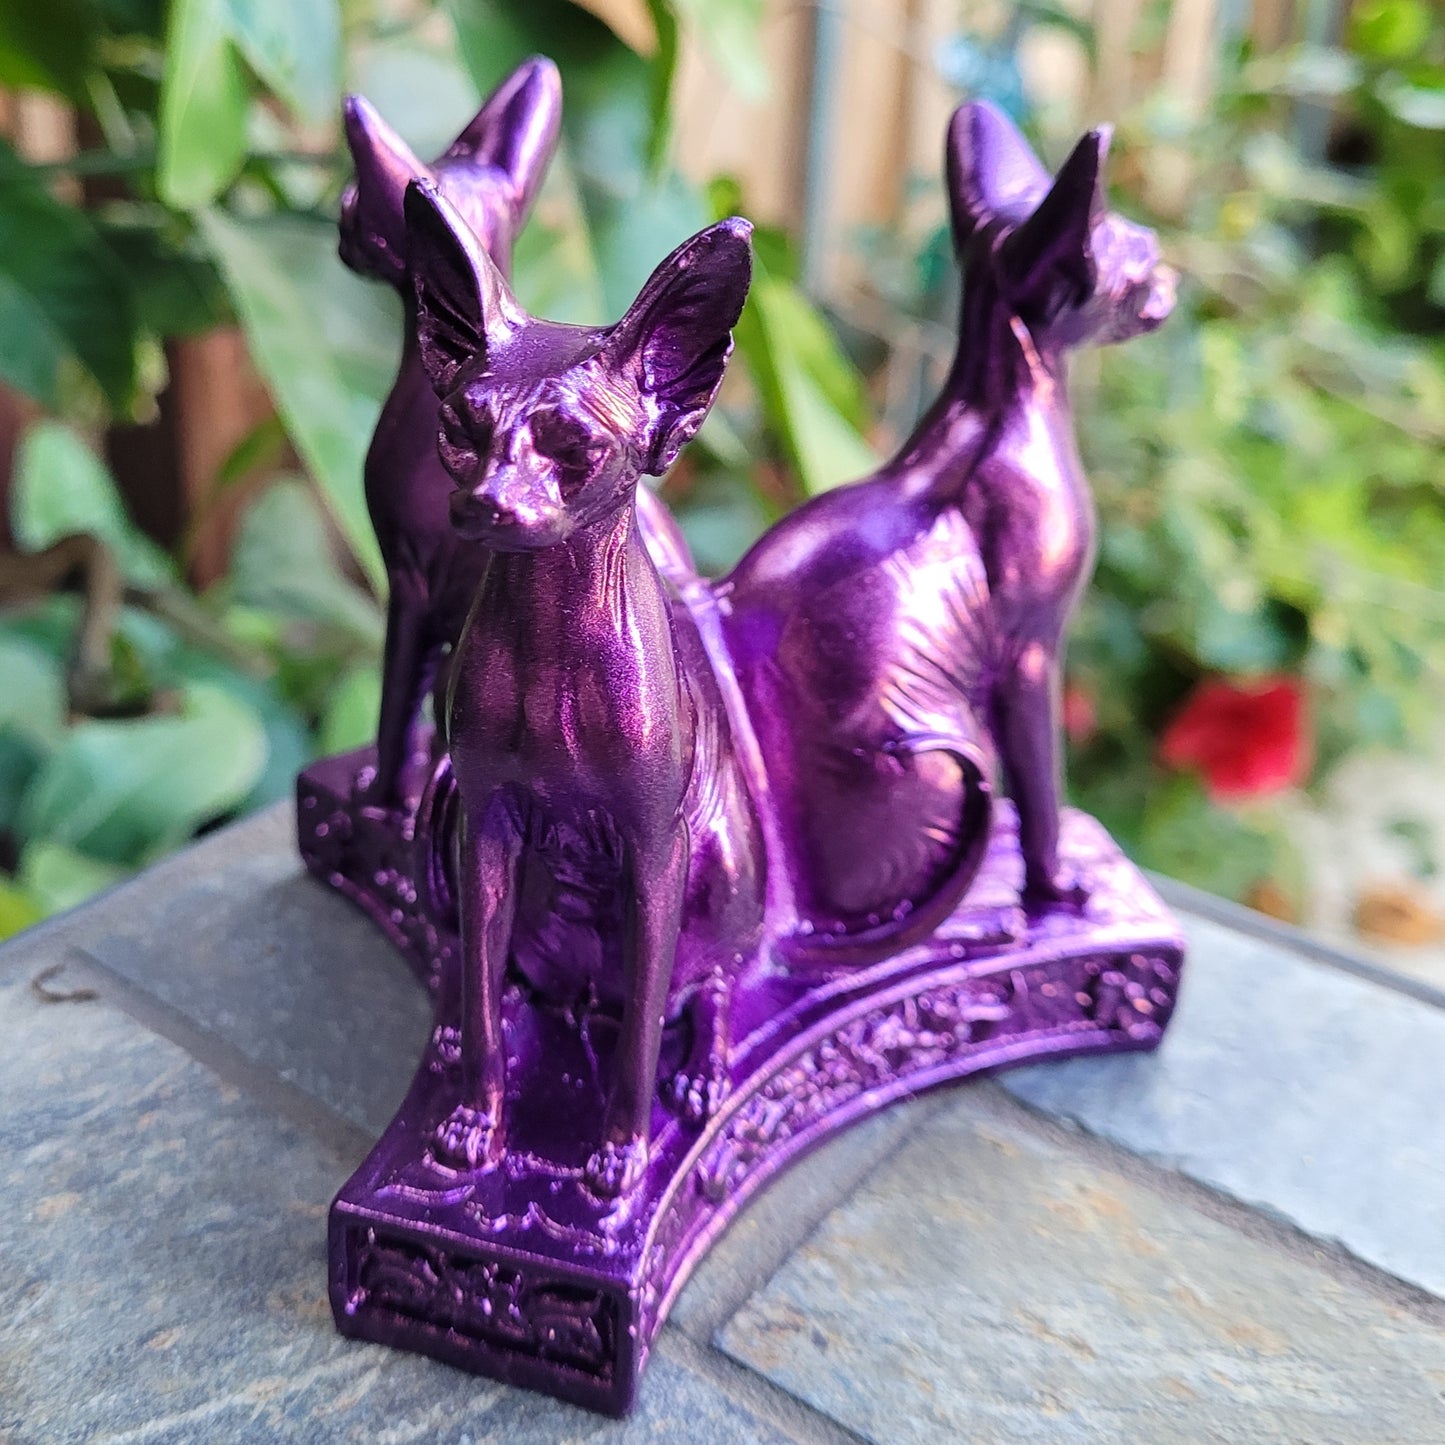 Egyptian Cat Sphere Display Stand in Purple or Black for Crystal Balls or Eggs 2" to 5" (51mm to 126mm)